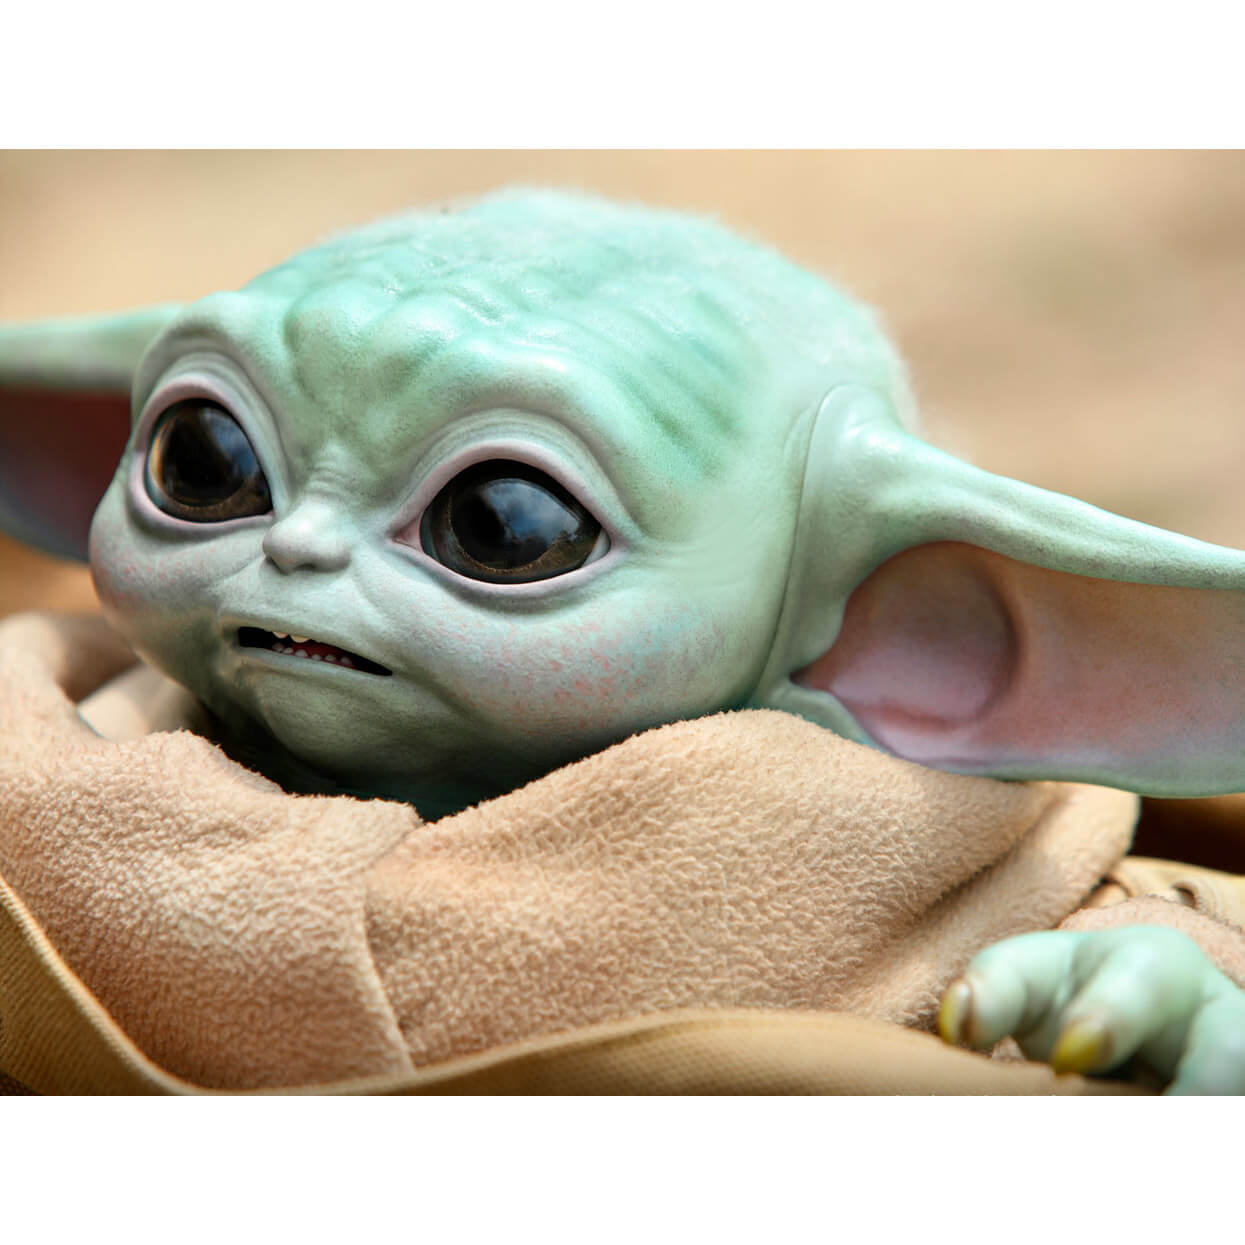 Hot Toys Star Wars The Mandalorian The Child Baby Yoda / Grogu,  Non-Refundable Down Payment Life-Size Collectible Figure - DE